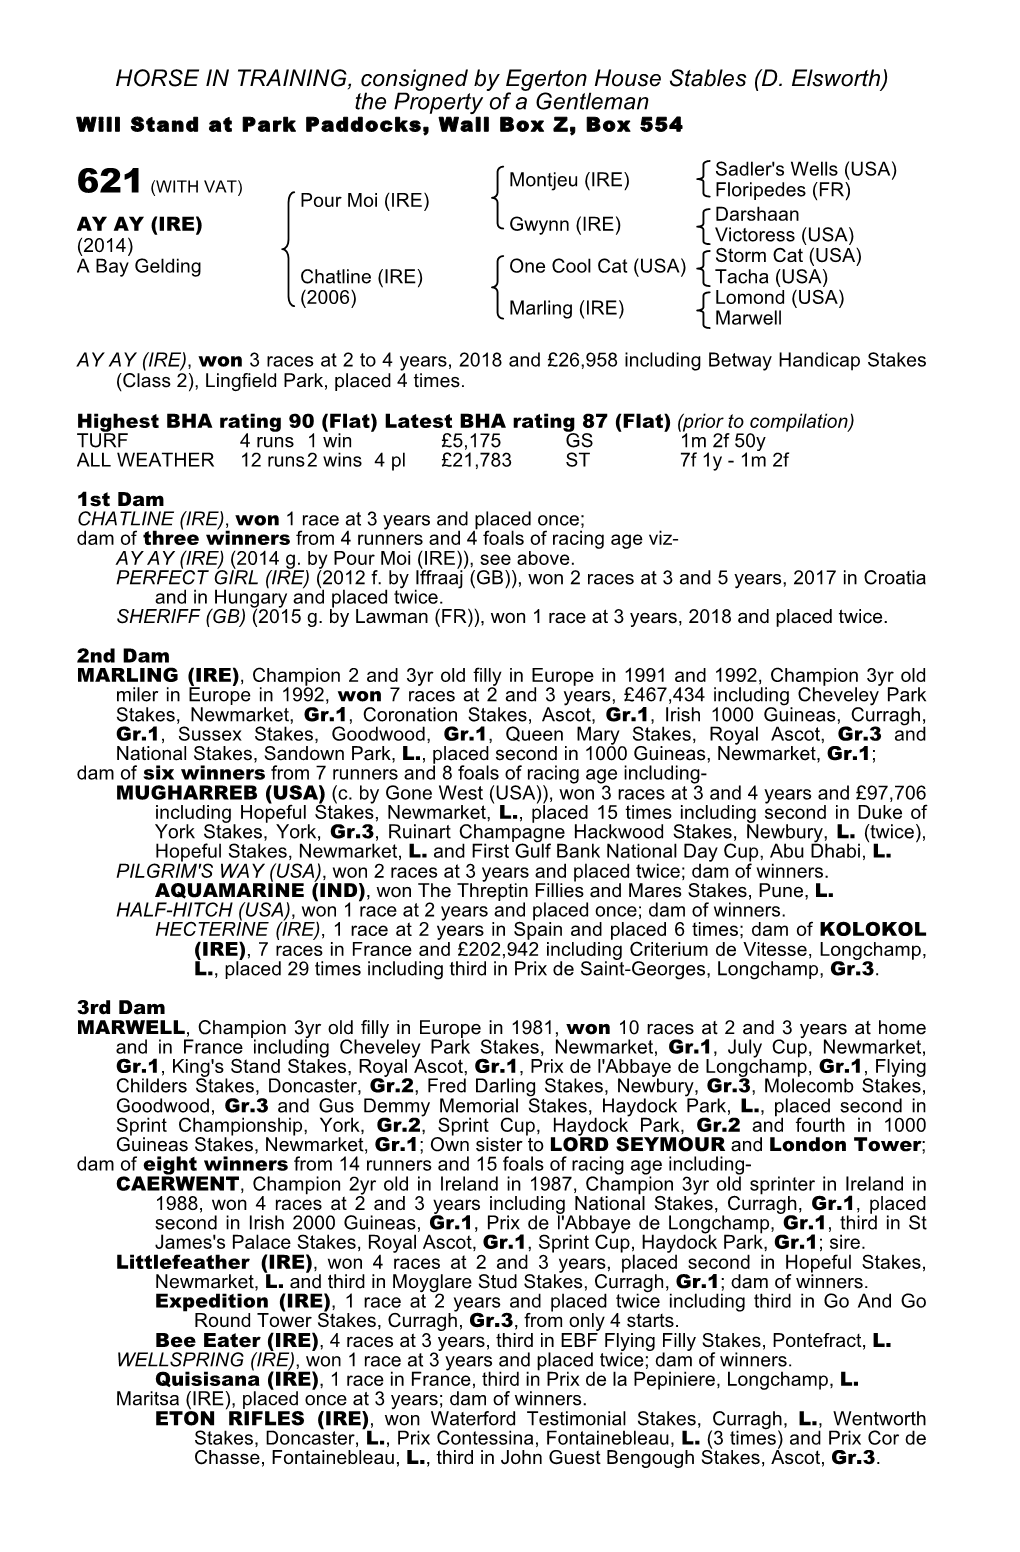 HORSE in TRAINING, Consigned by Egerton House Stables (D